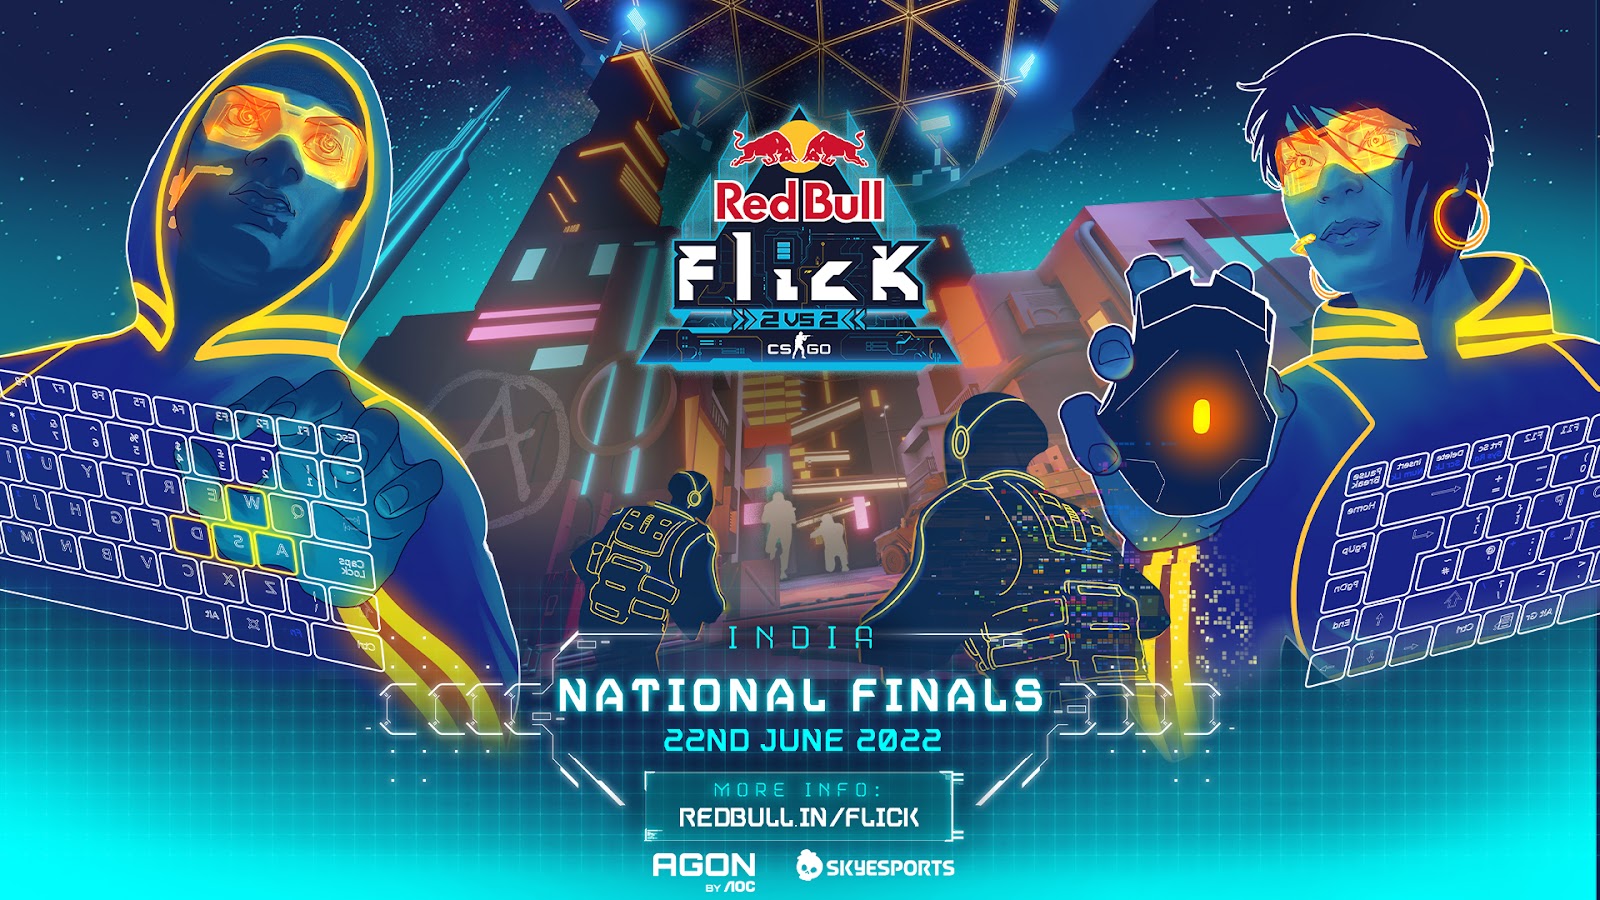 Red Bull Flick India 2022 (image via Skyesports)